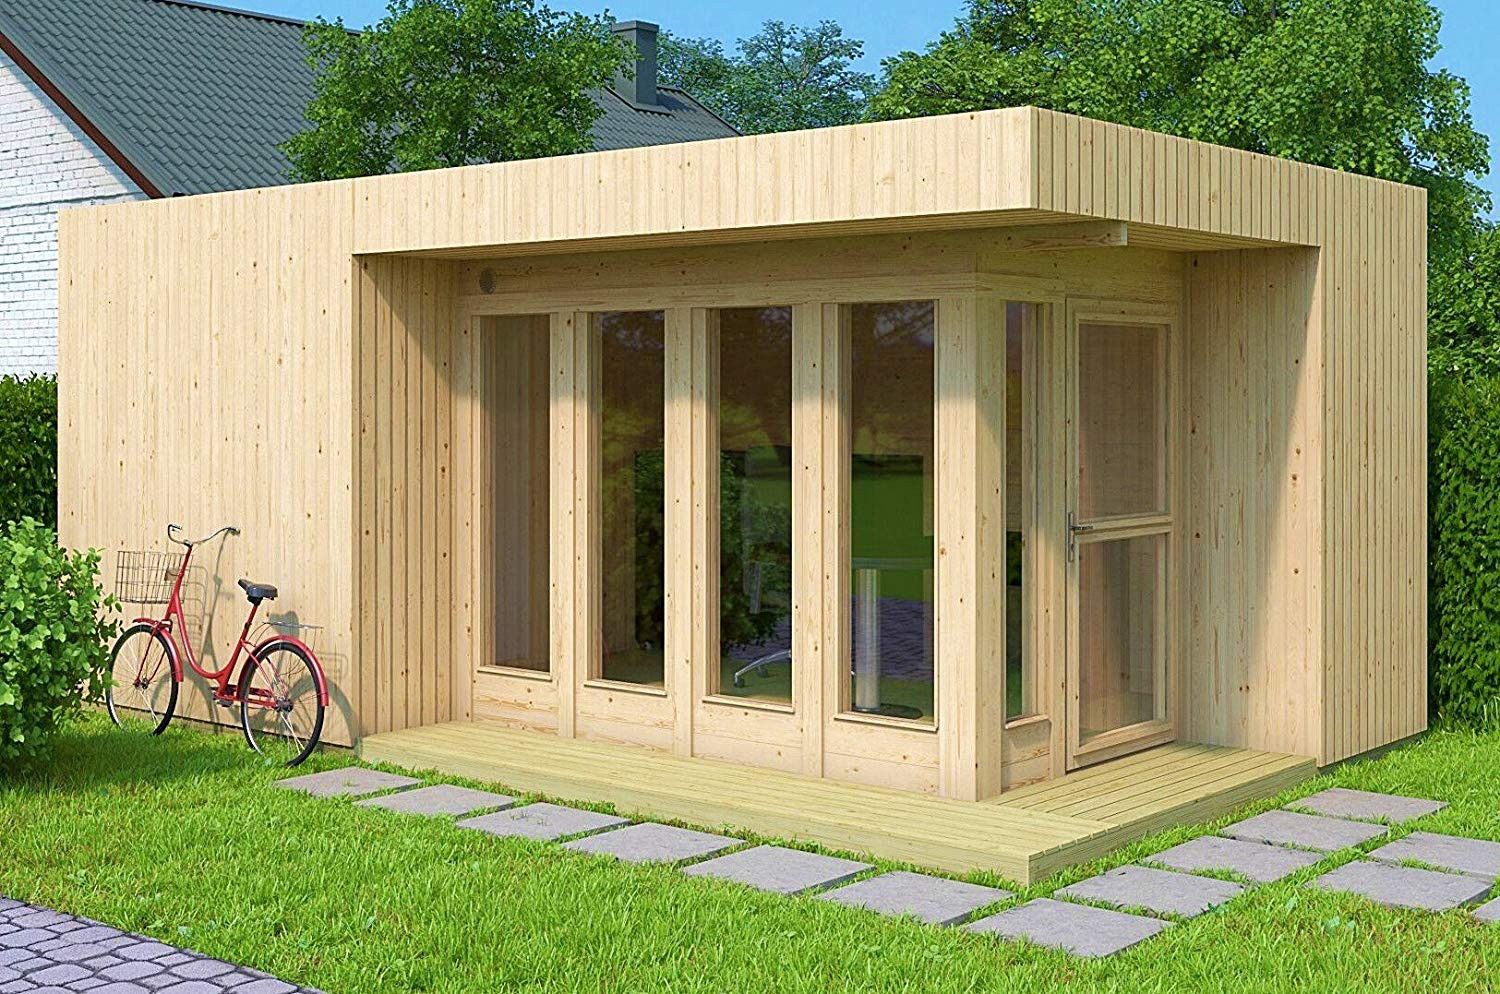 Diy Home Kit Luxury Amazon Sells A Diy Tiny House Kit You Can Build Yourself Of Diy Home Kit 